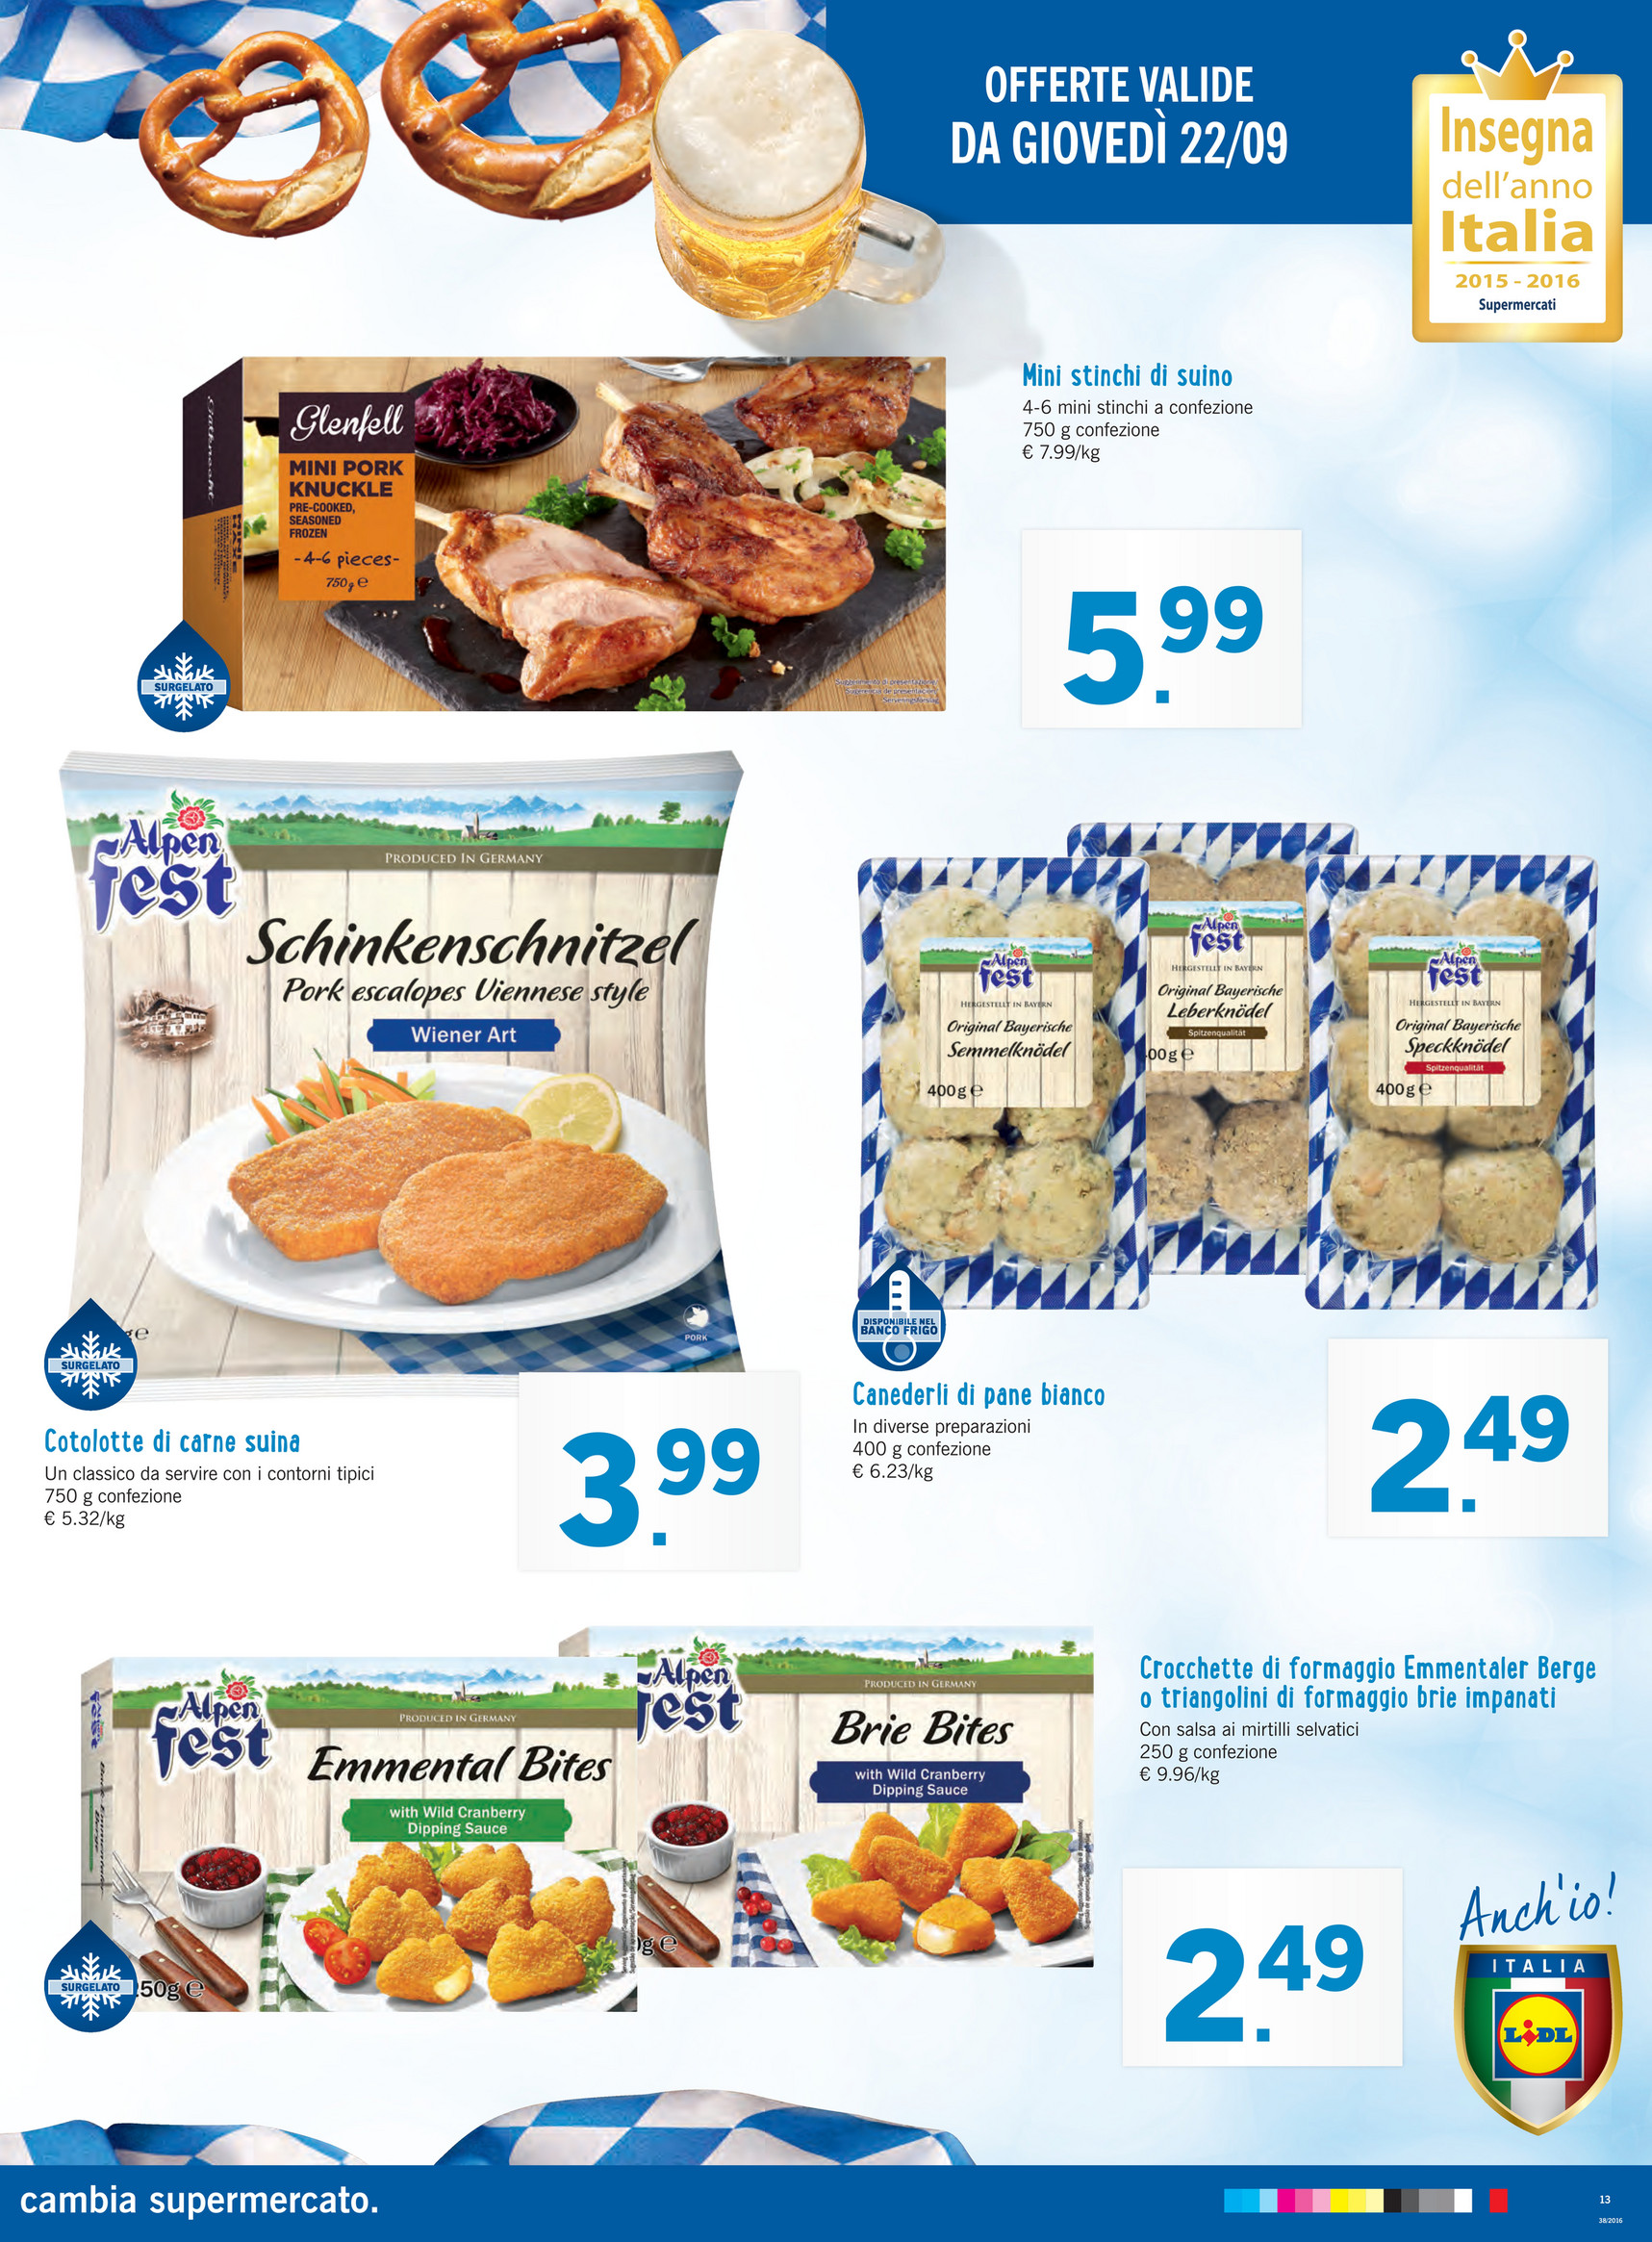 SP - Volantino Lidl - SottoCosto - Page 30-31 - Created with Publitas.com